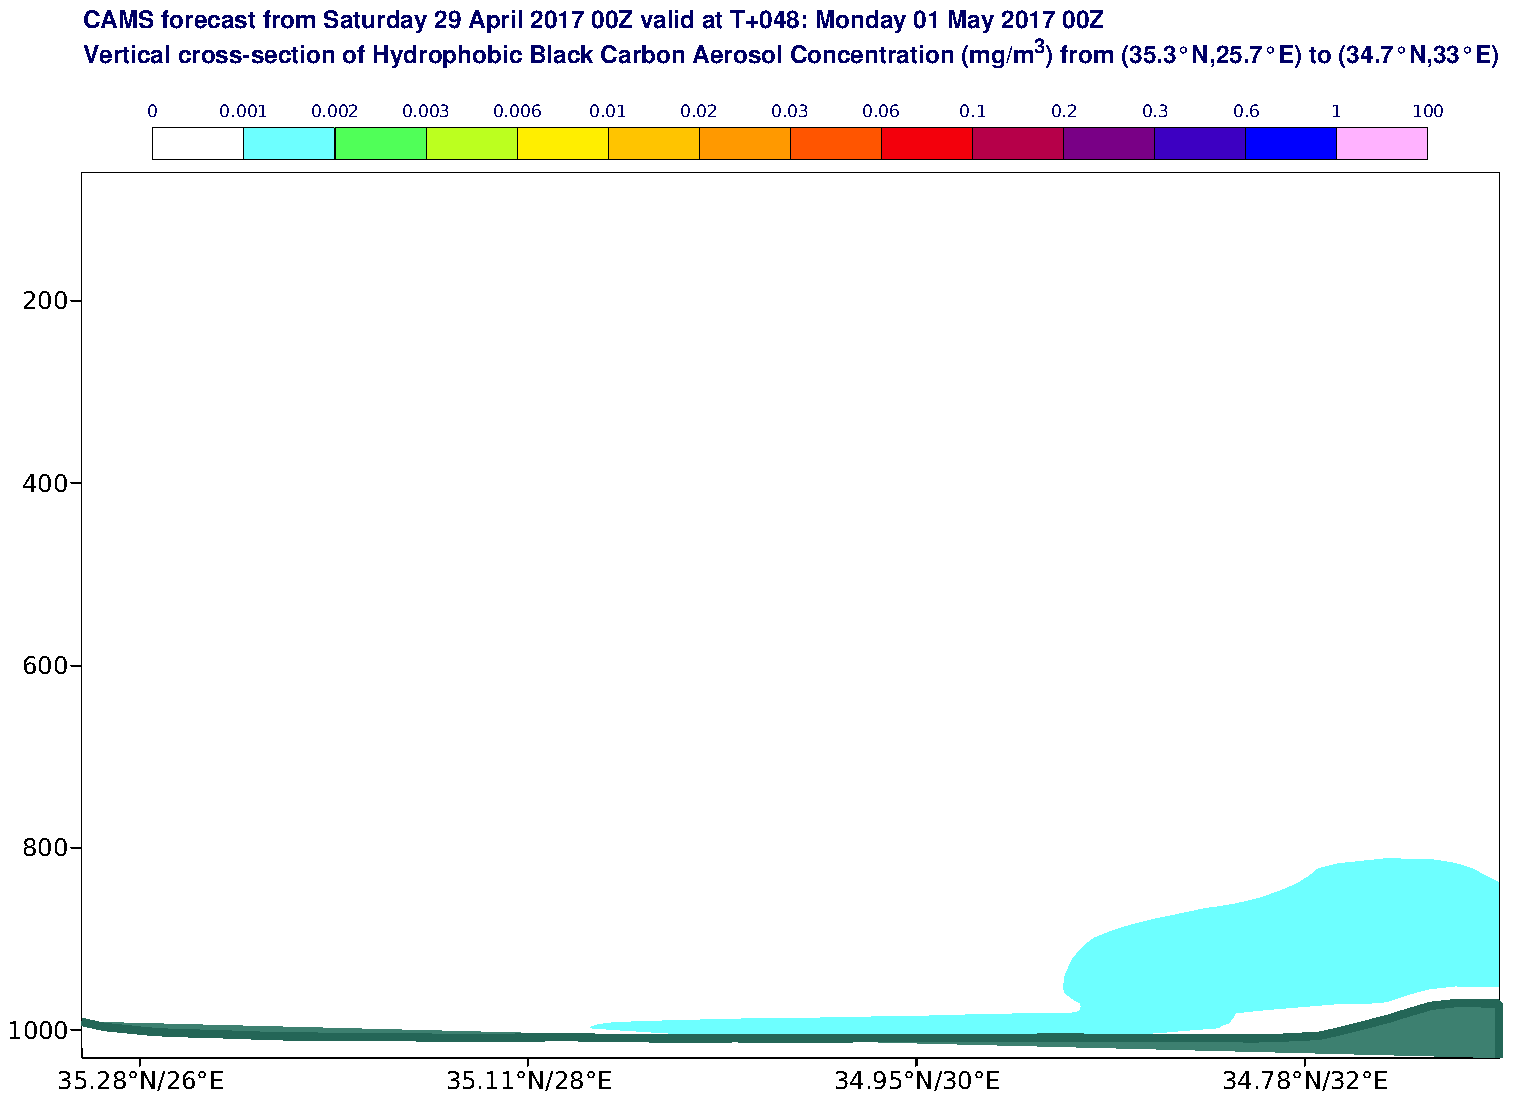 Vertical cross-section of Hydrophobic Black Carbon Aerosol Concentration (mg/m3) valid at T48 - 2017-05-01 00:00